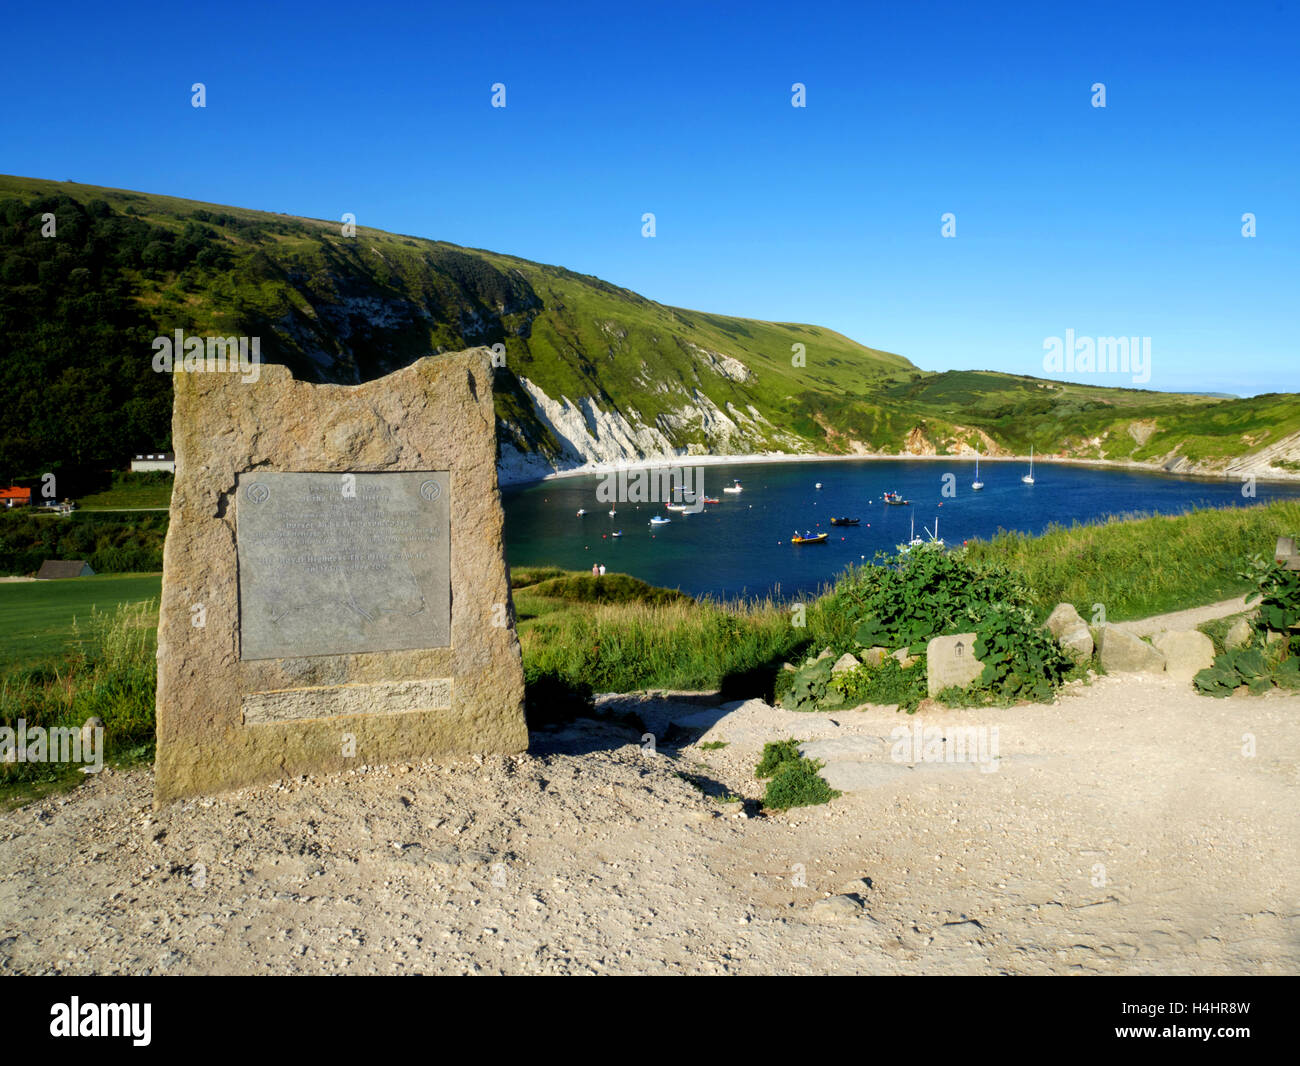 This stone marks the designation of the Jurassic Coast as a UNESCO World Heritage site in 2002, at Lulworth Cove, Dorset. Stock Photo